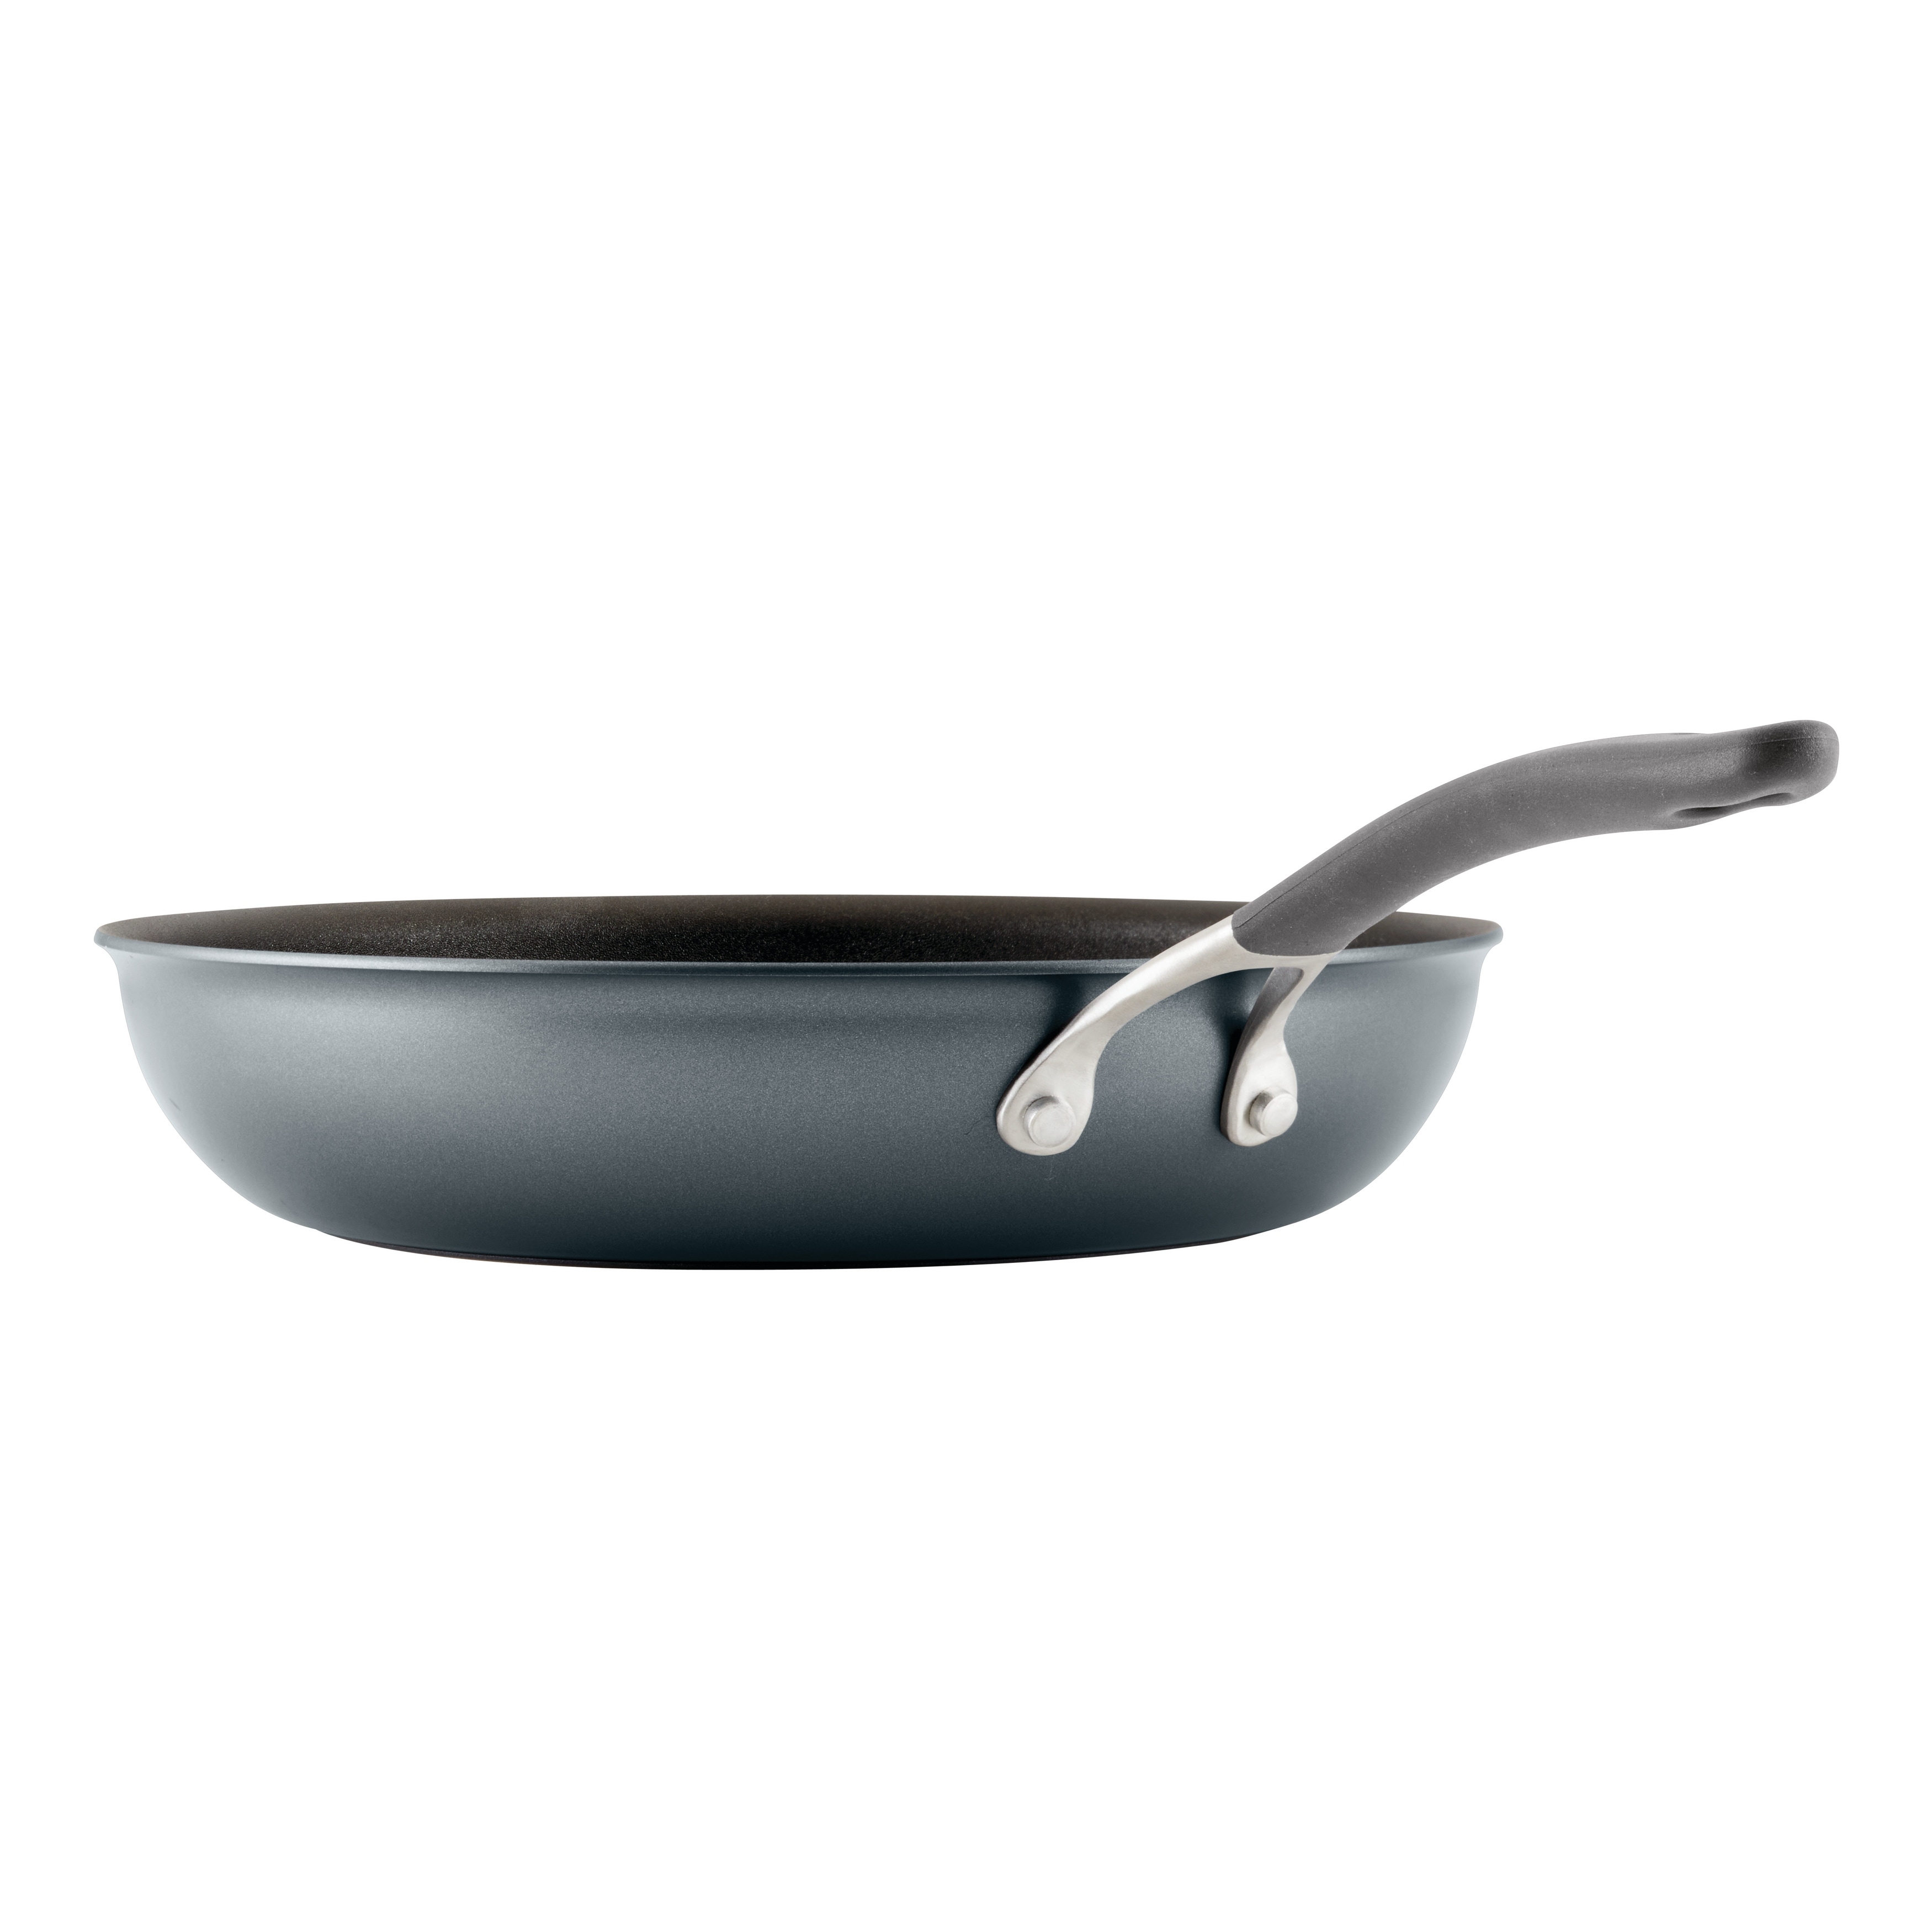 Circulon A1 Series 3 qt. Aluminum Saucepan in Graphite with Lid, with Strainer